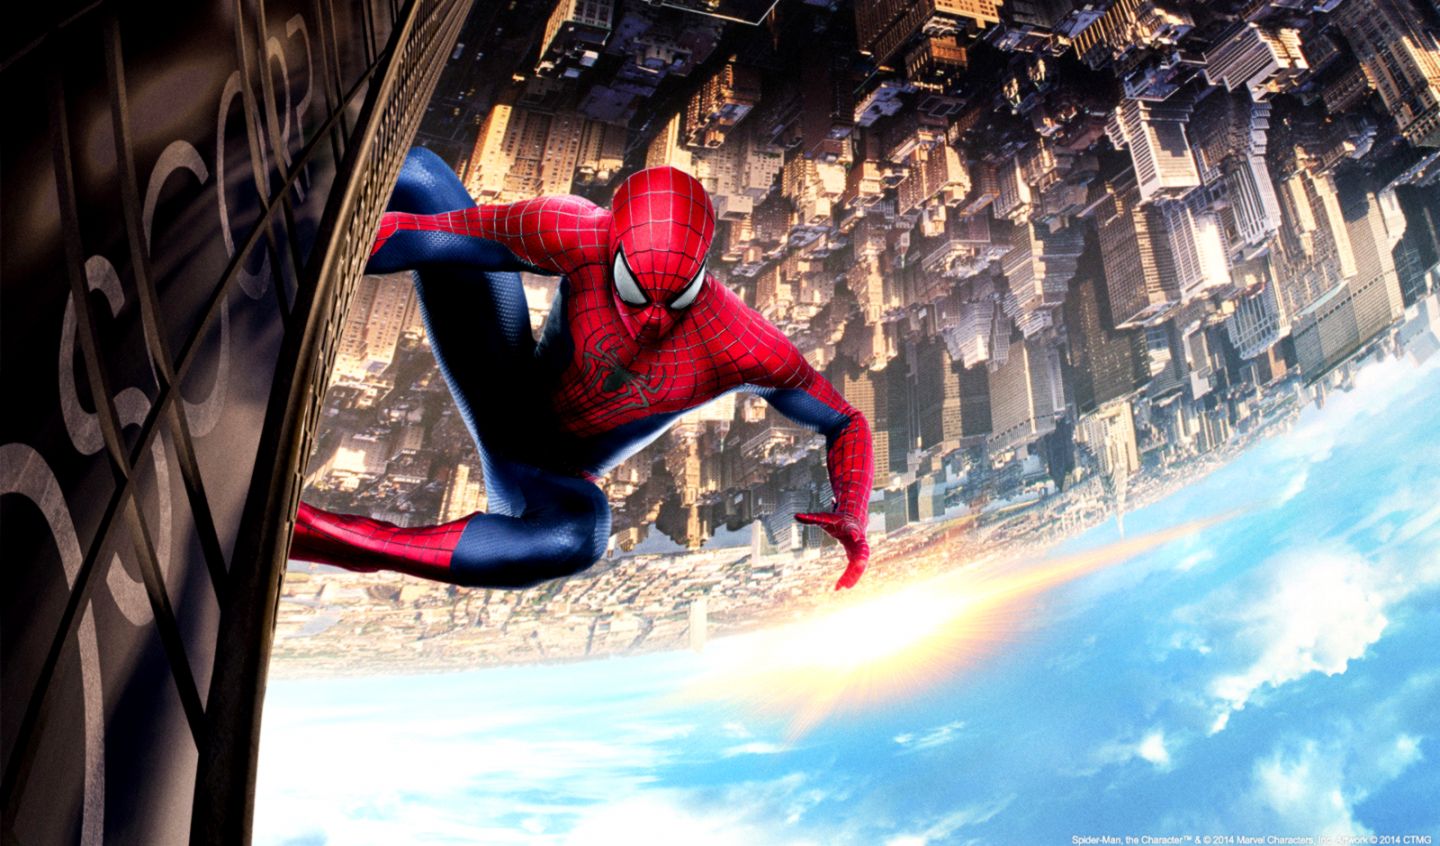 The Amazing Spider Man 2 Wallpapers Hd & Facebook Cover - Amazing Spider Man Wallpaper Hd 1080p - HD Wallpaper 